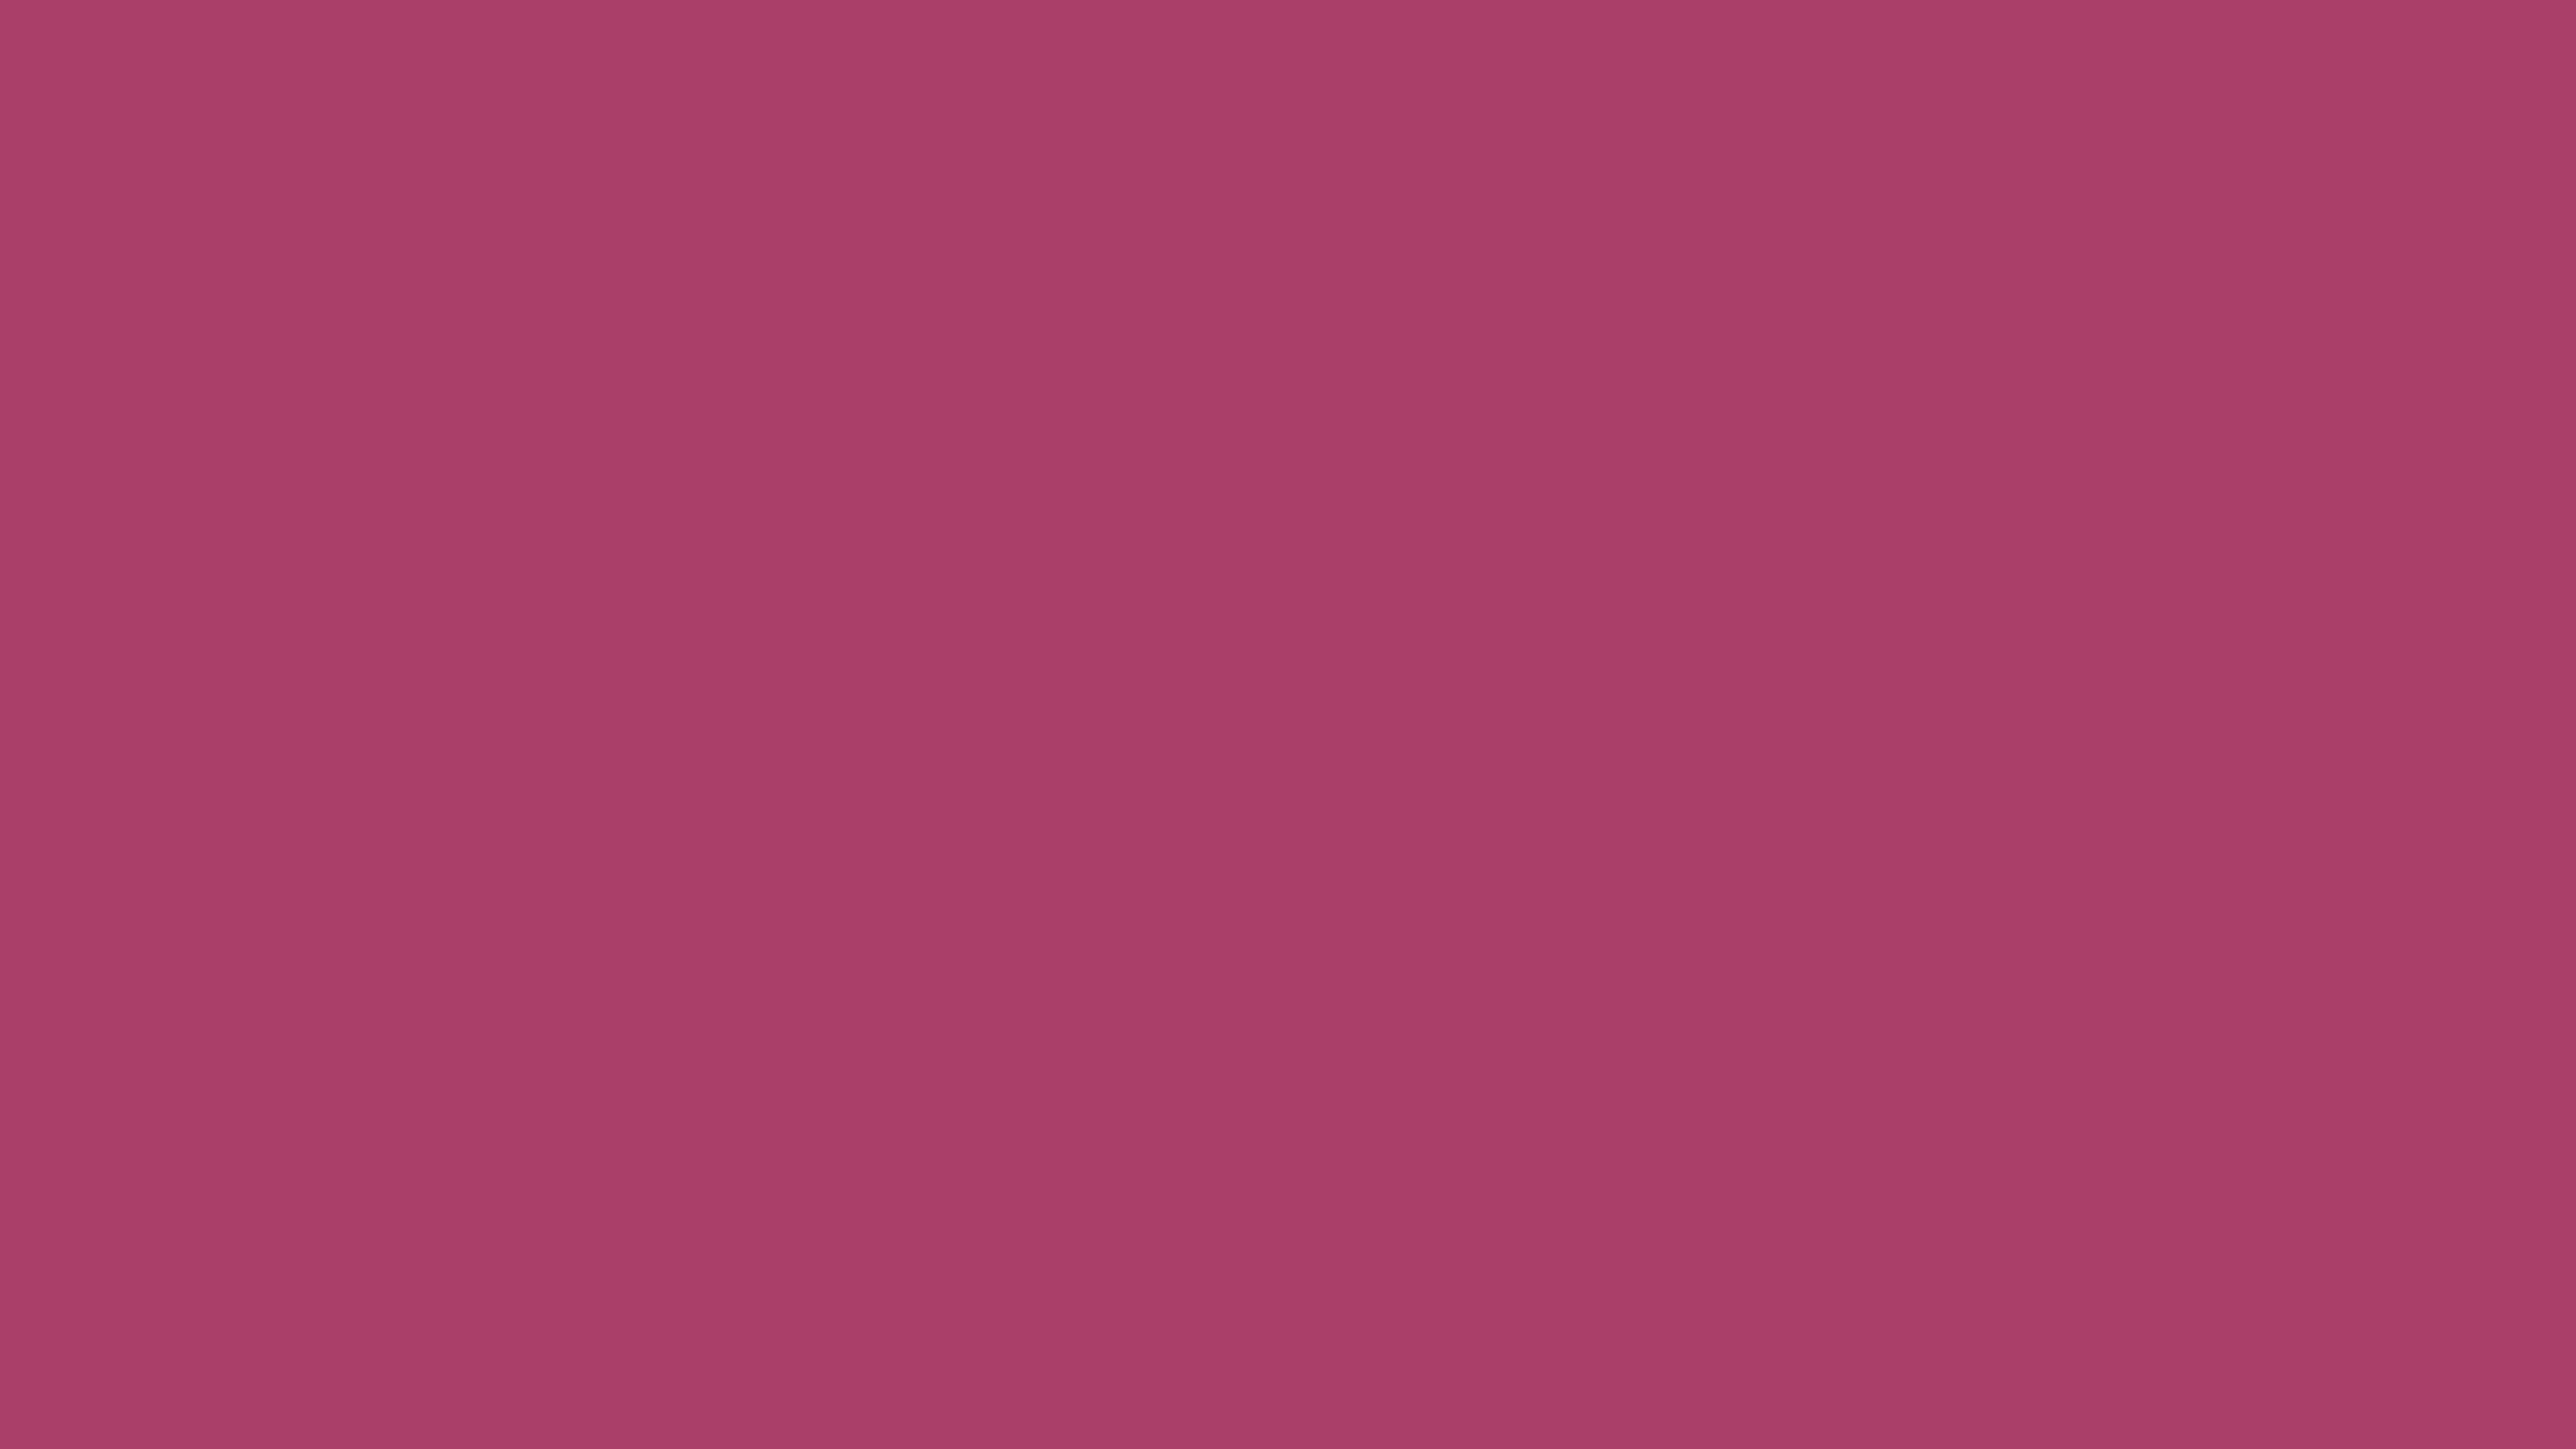 7680x4320 Medium Ruby Solid Color Background